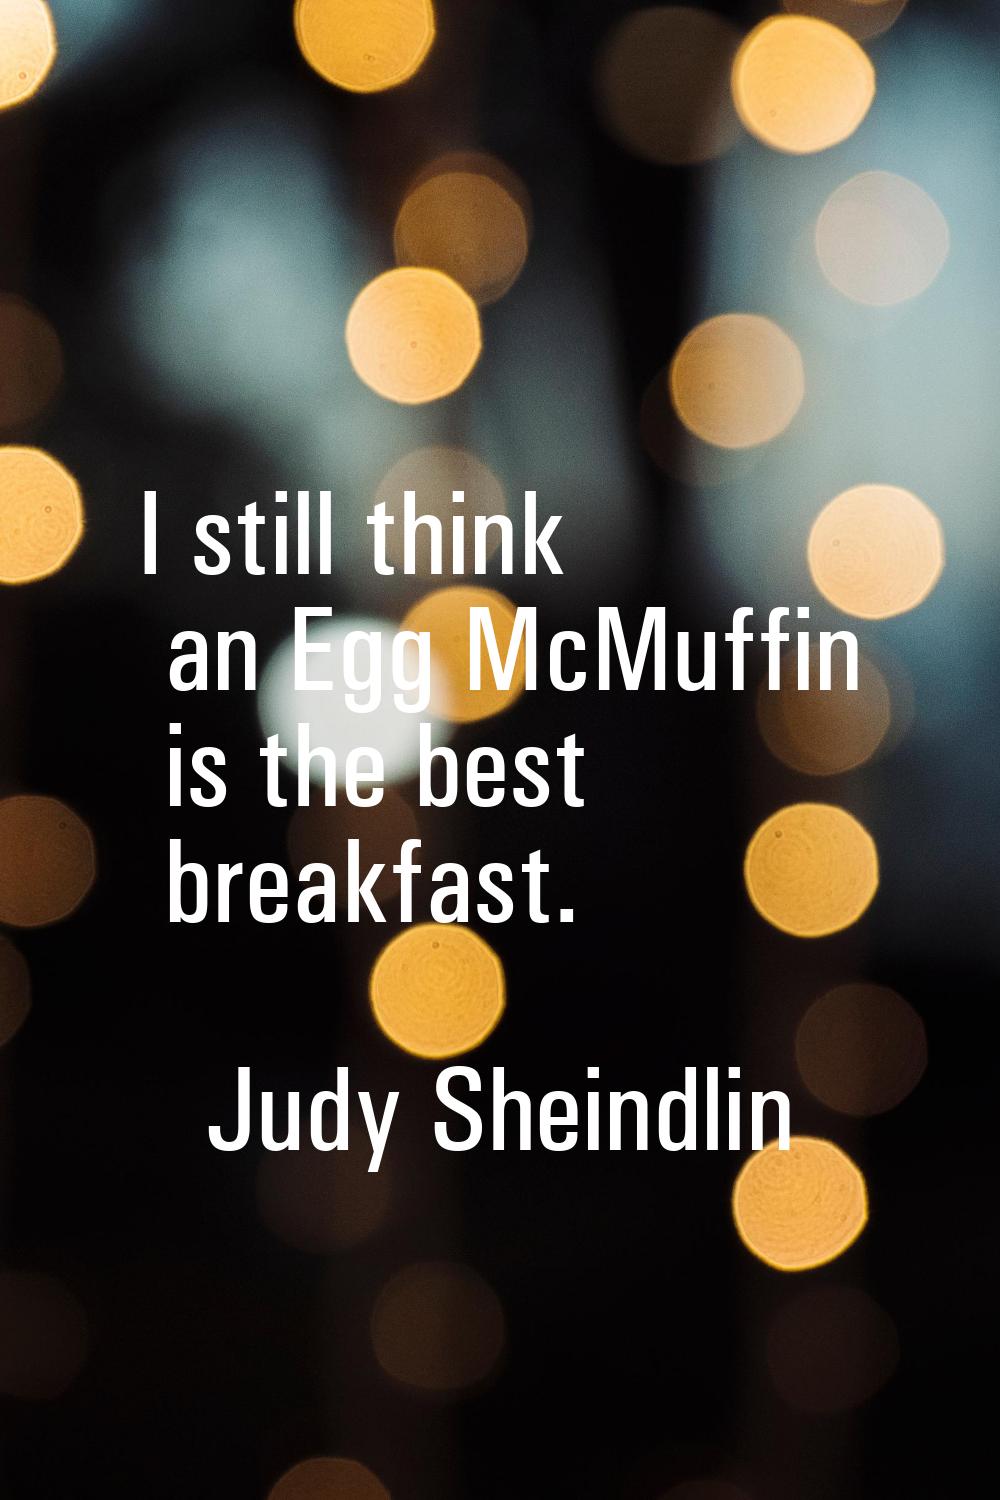 I still think an Egg McMuffin is the best breakfast.